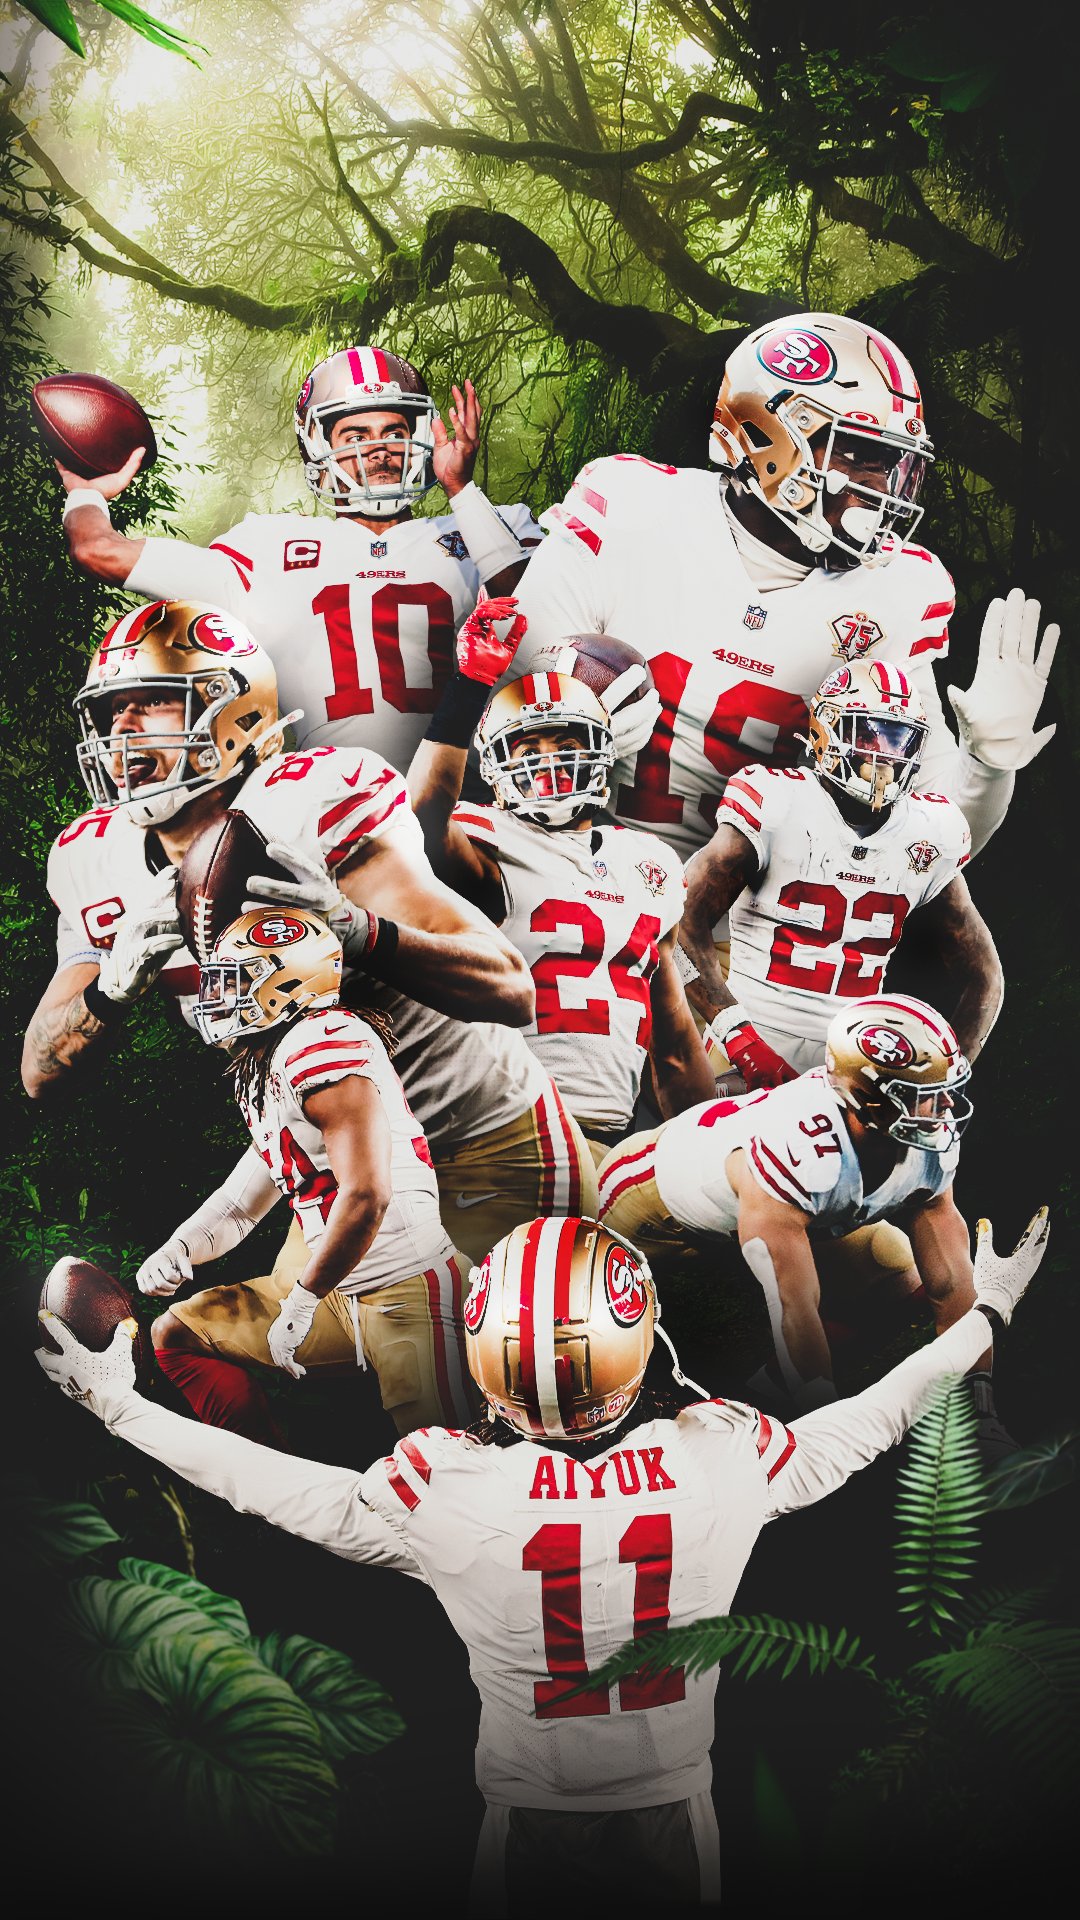 49ers The Niners cant seem to shake last years problems